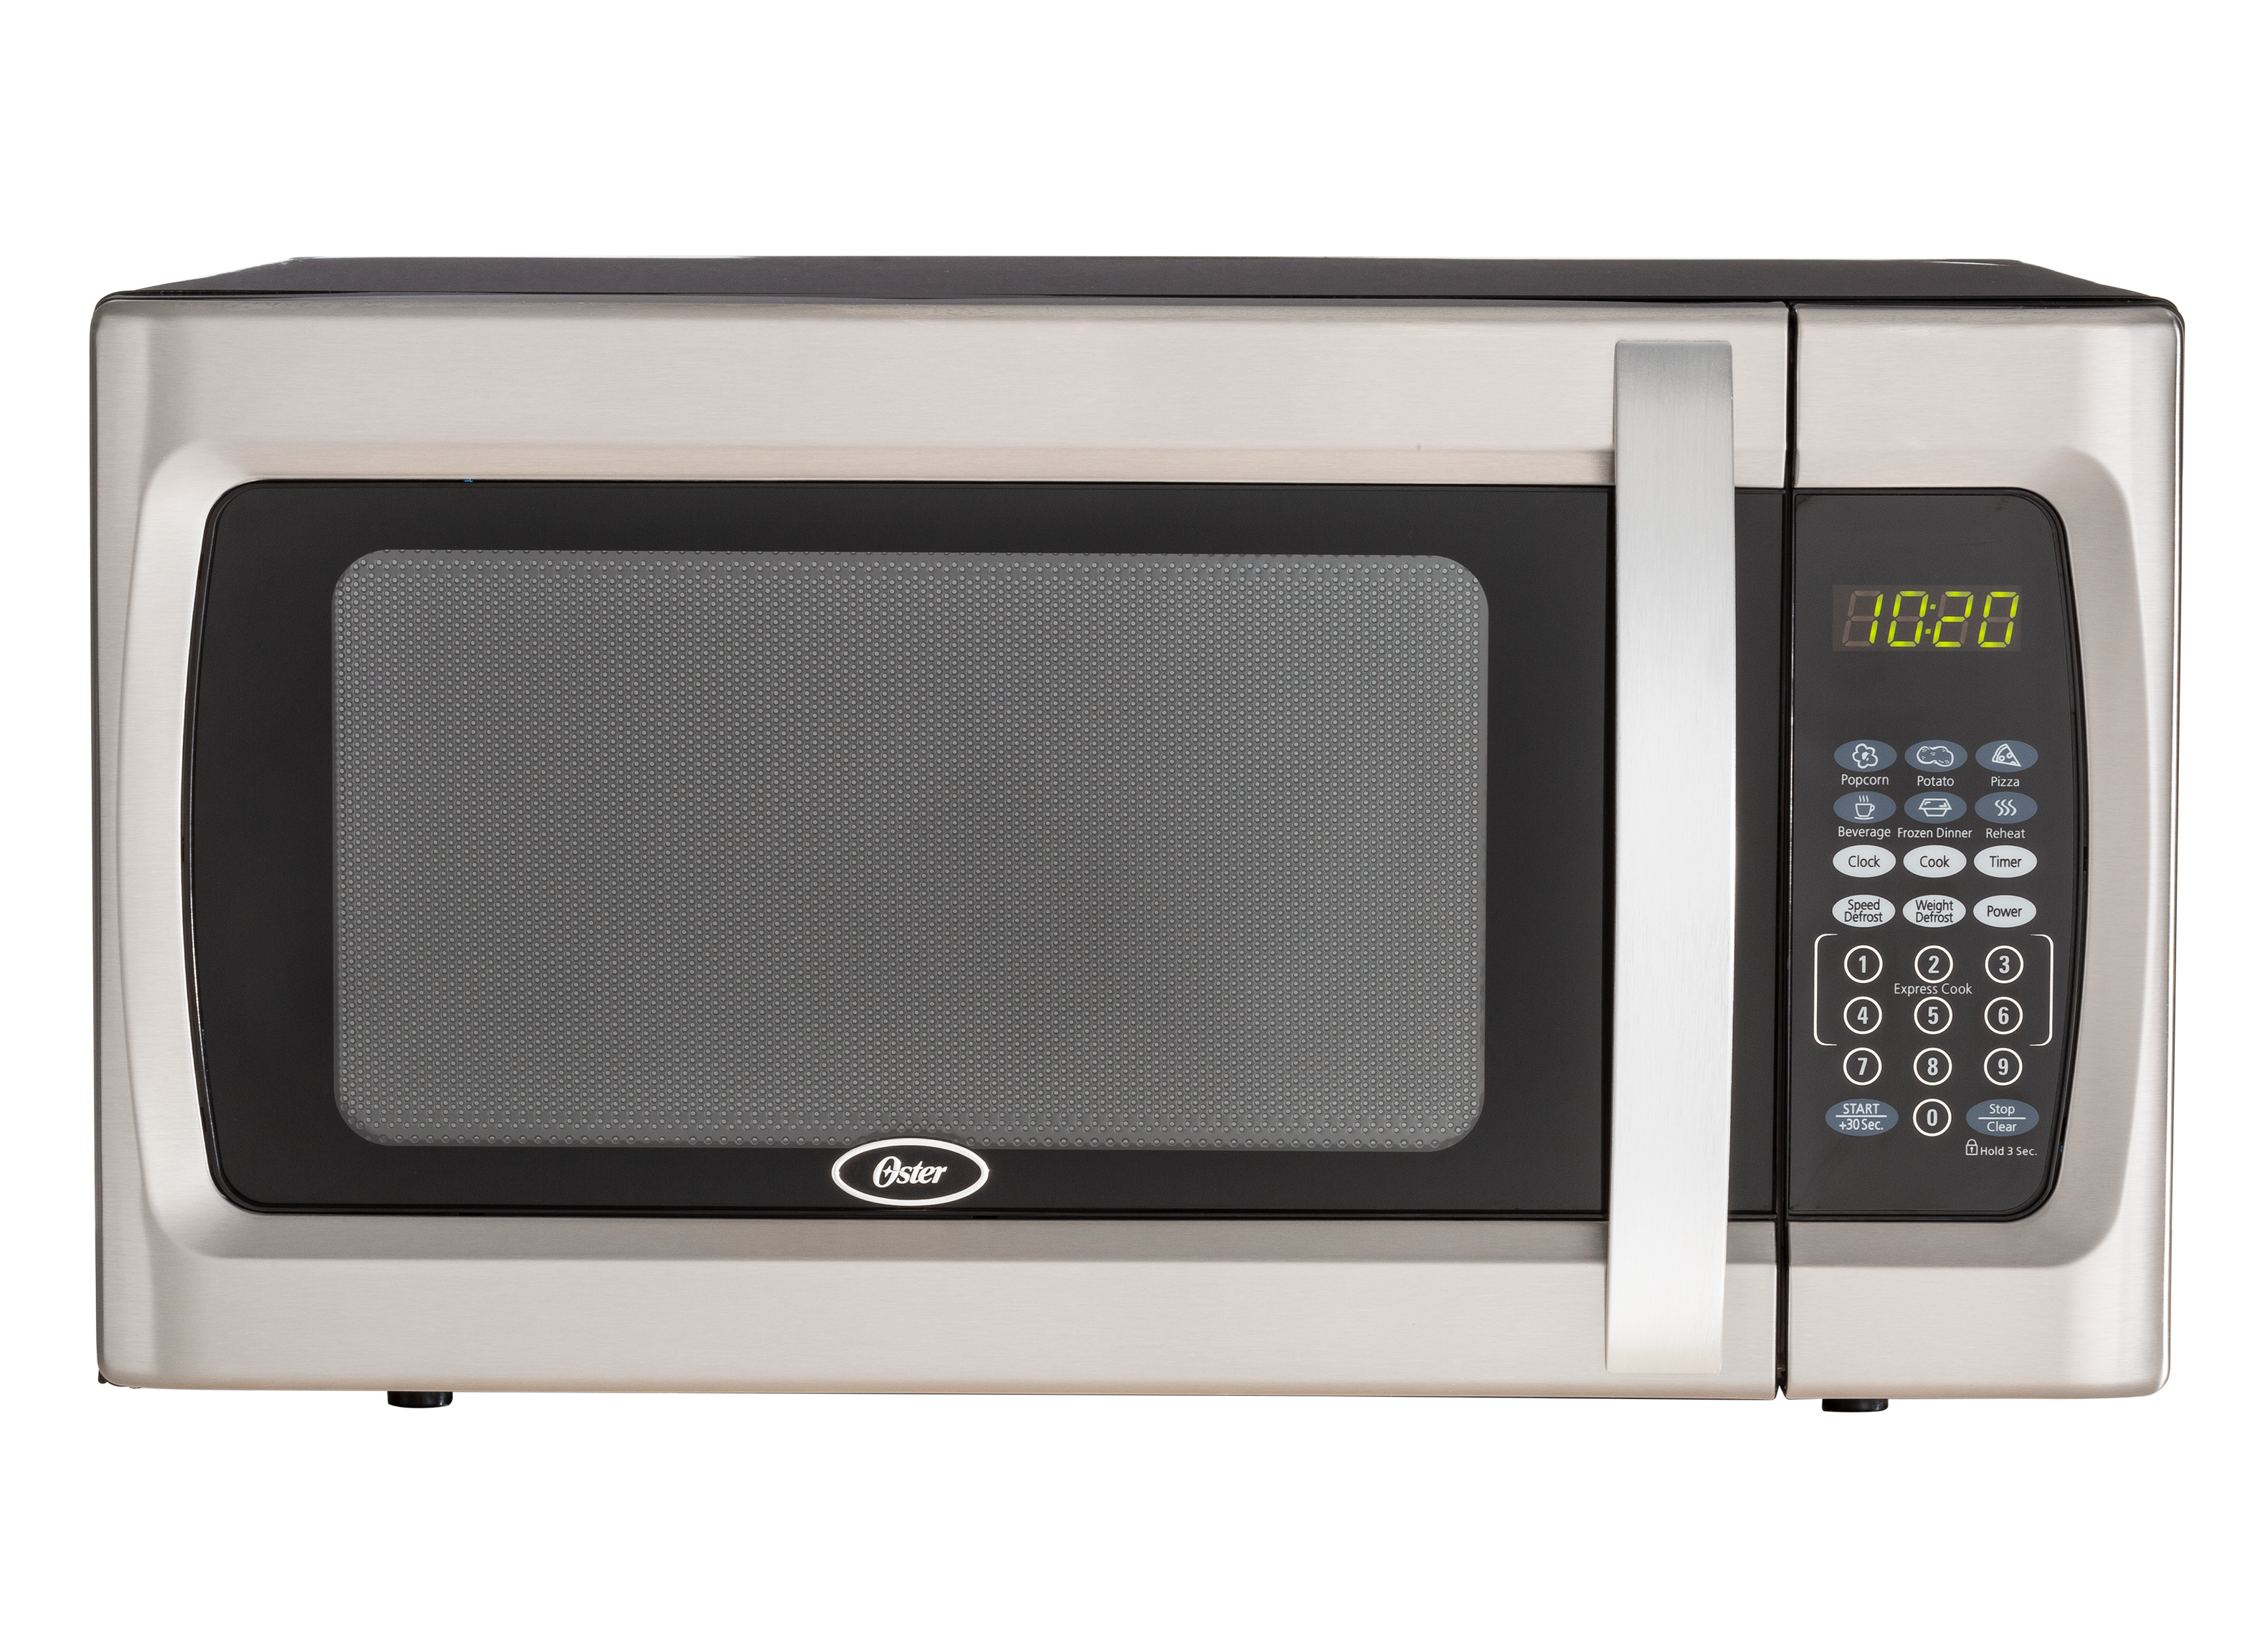 Oster Extra Large Digital Countertop Oven Open Box Review 